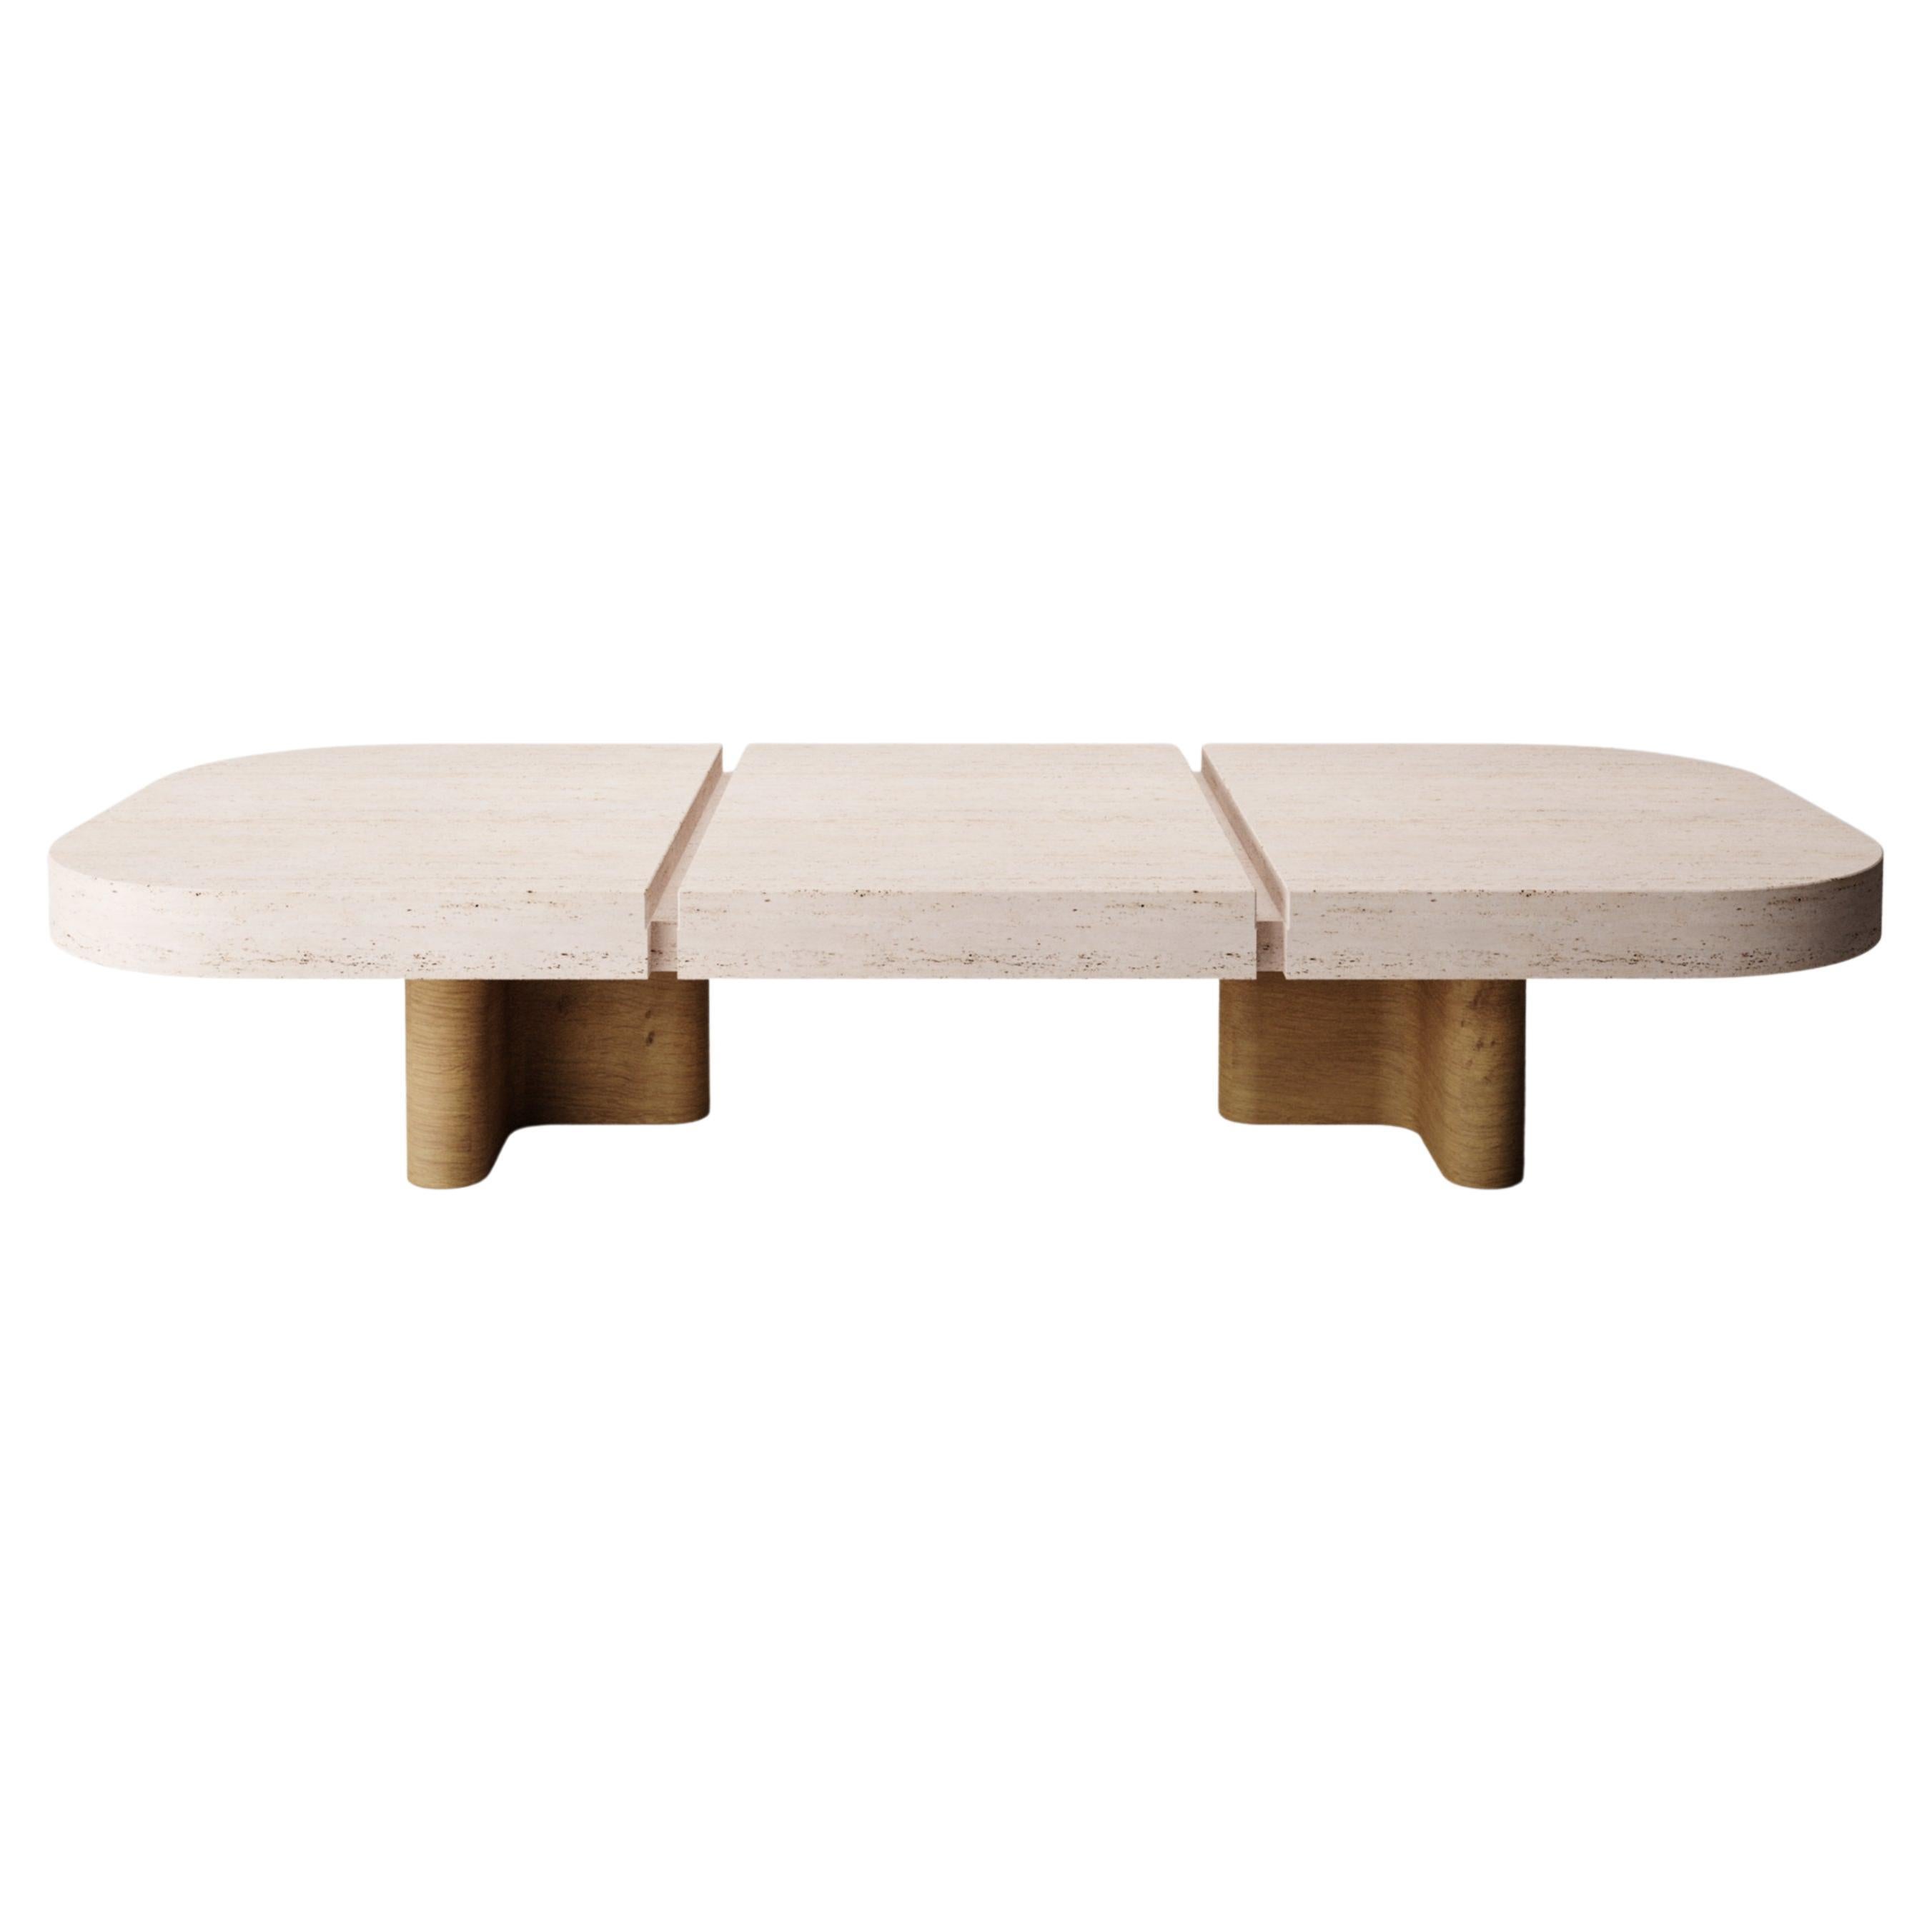 Collector -Designed by Studio Rig Meco Center Table Natural Oak and Travertino For Sale